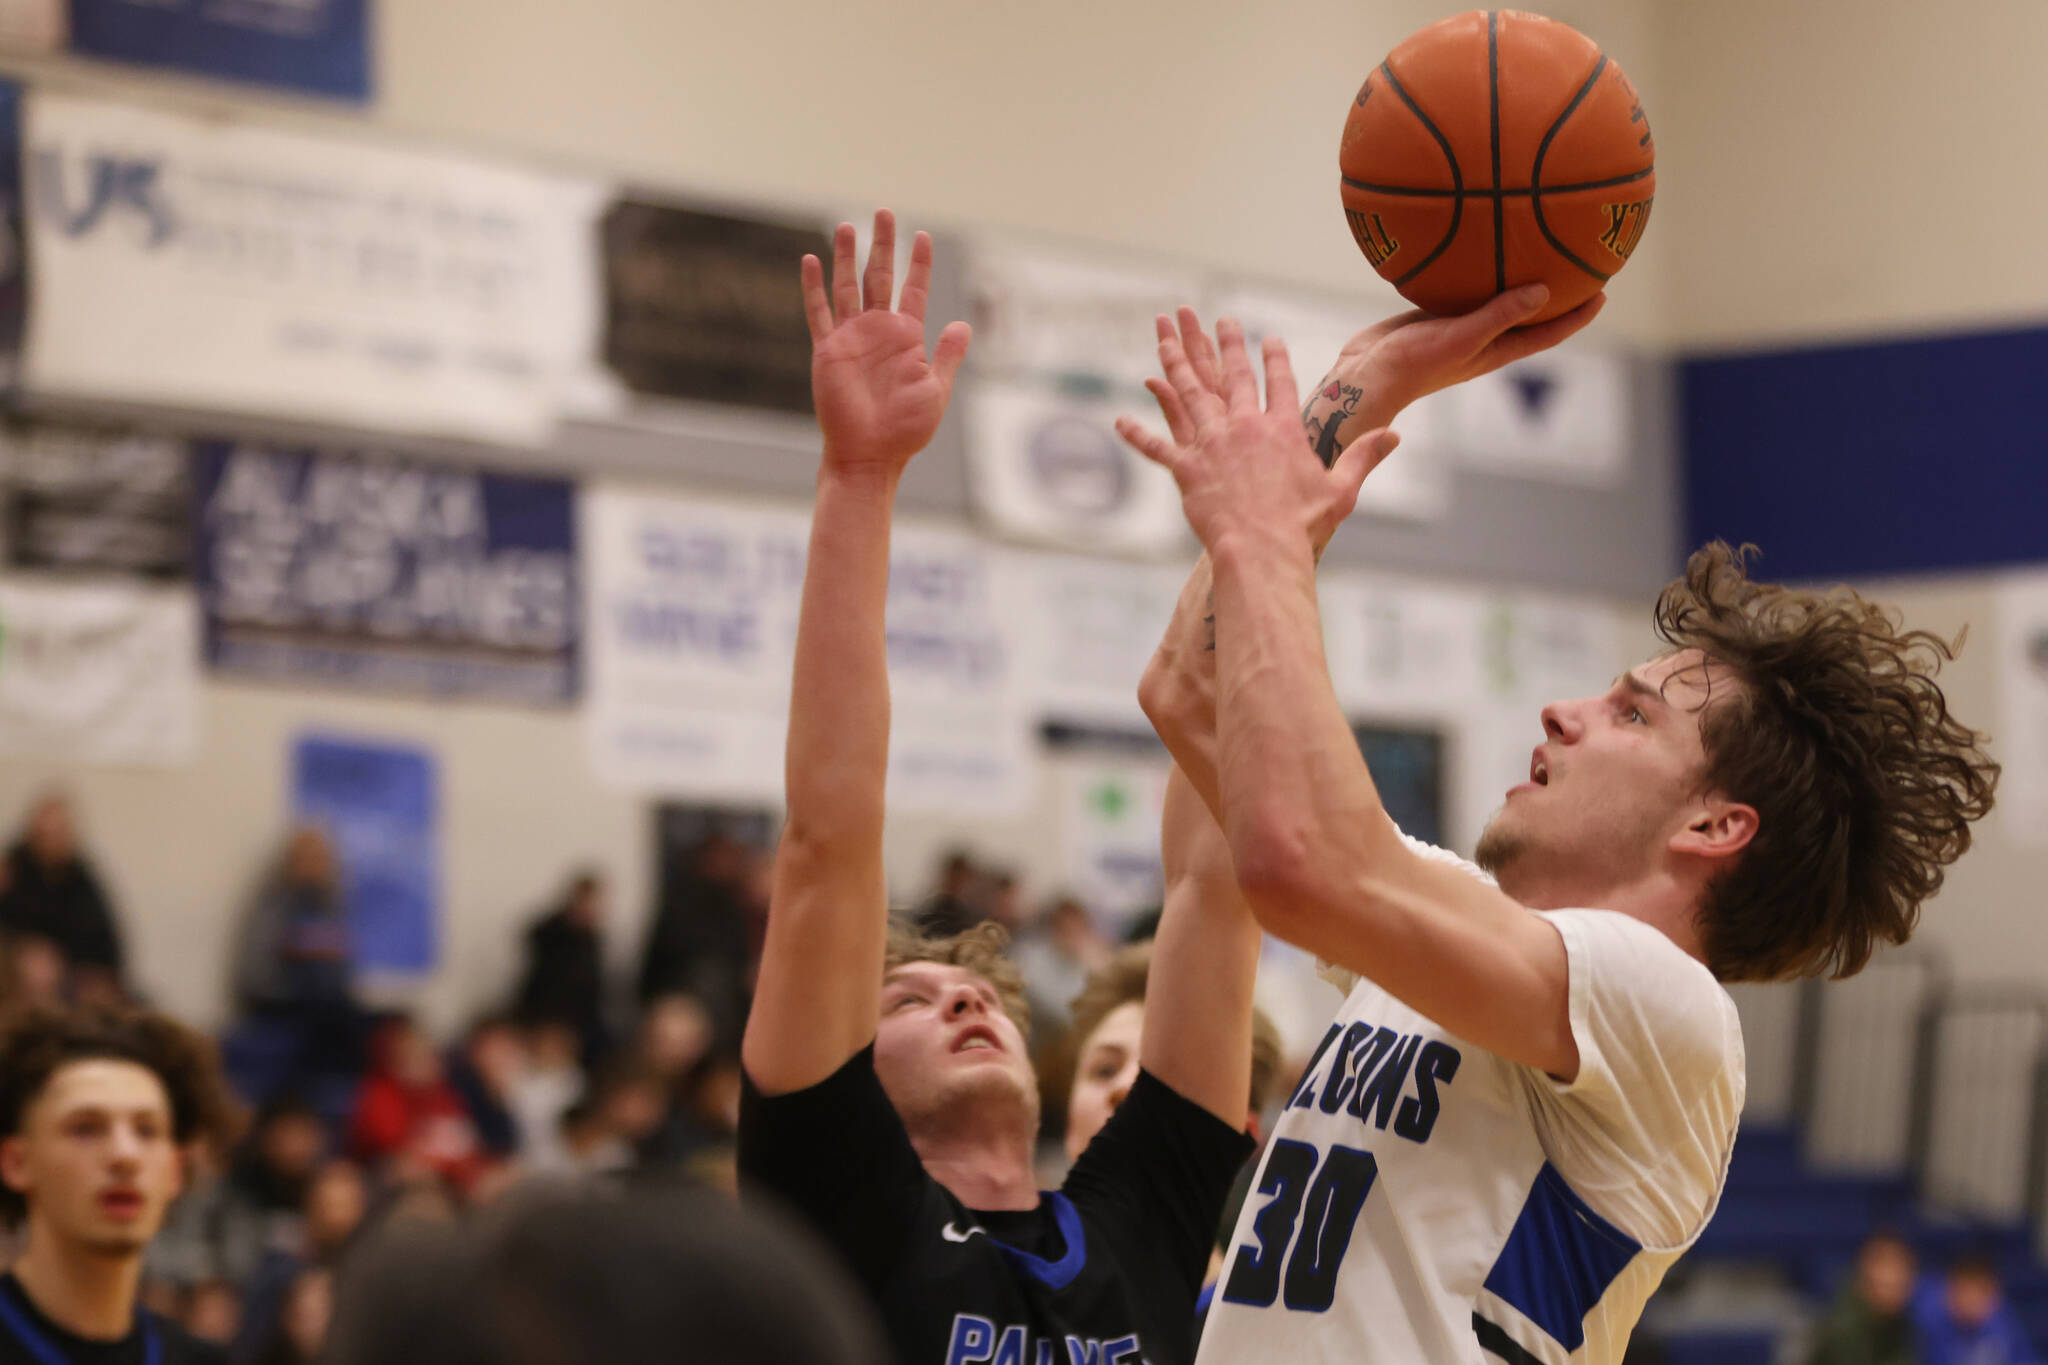 Thomas Baxter puts up a shot against Palmer High School. The TMHS junior finished the game with 22 points. (Ben Hohenstatt / Juneau Empire)